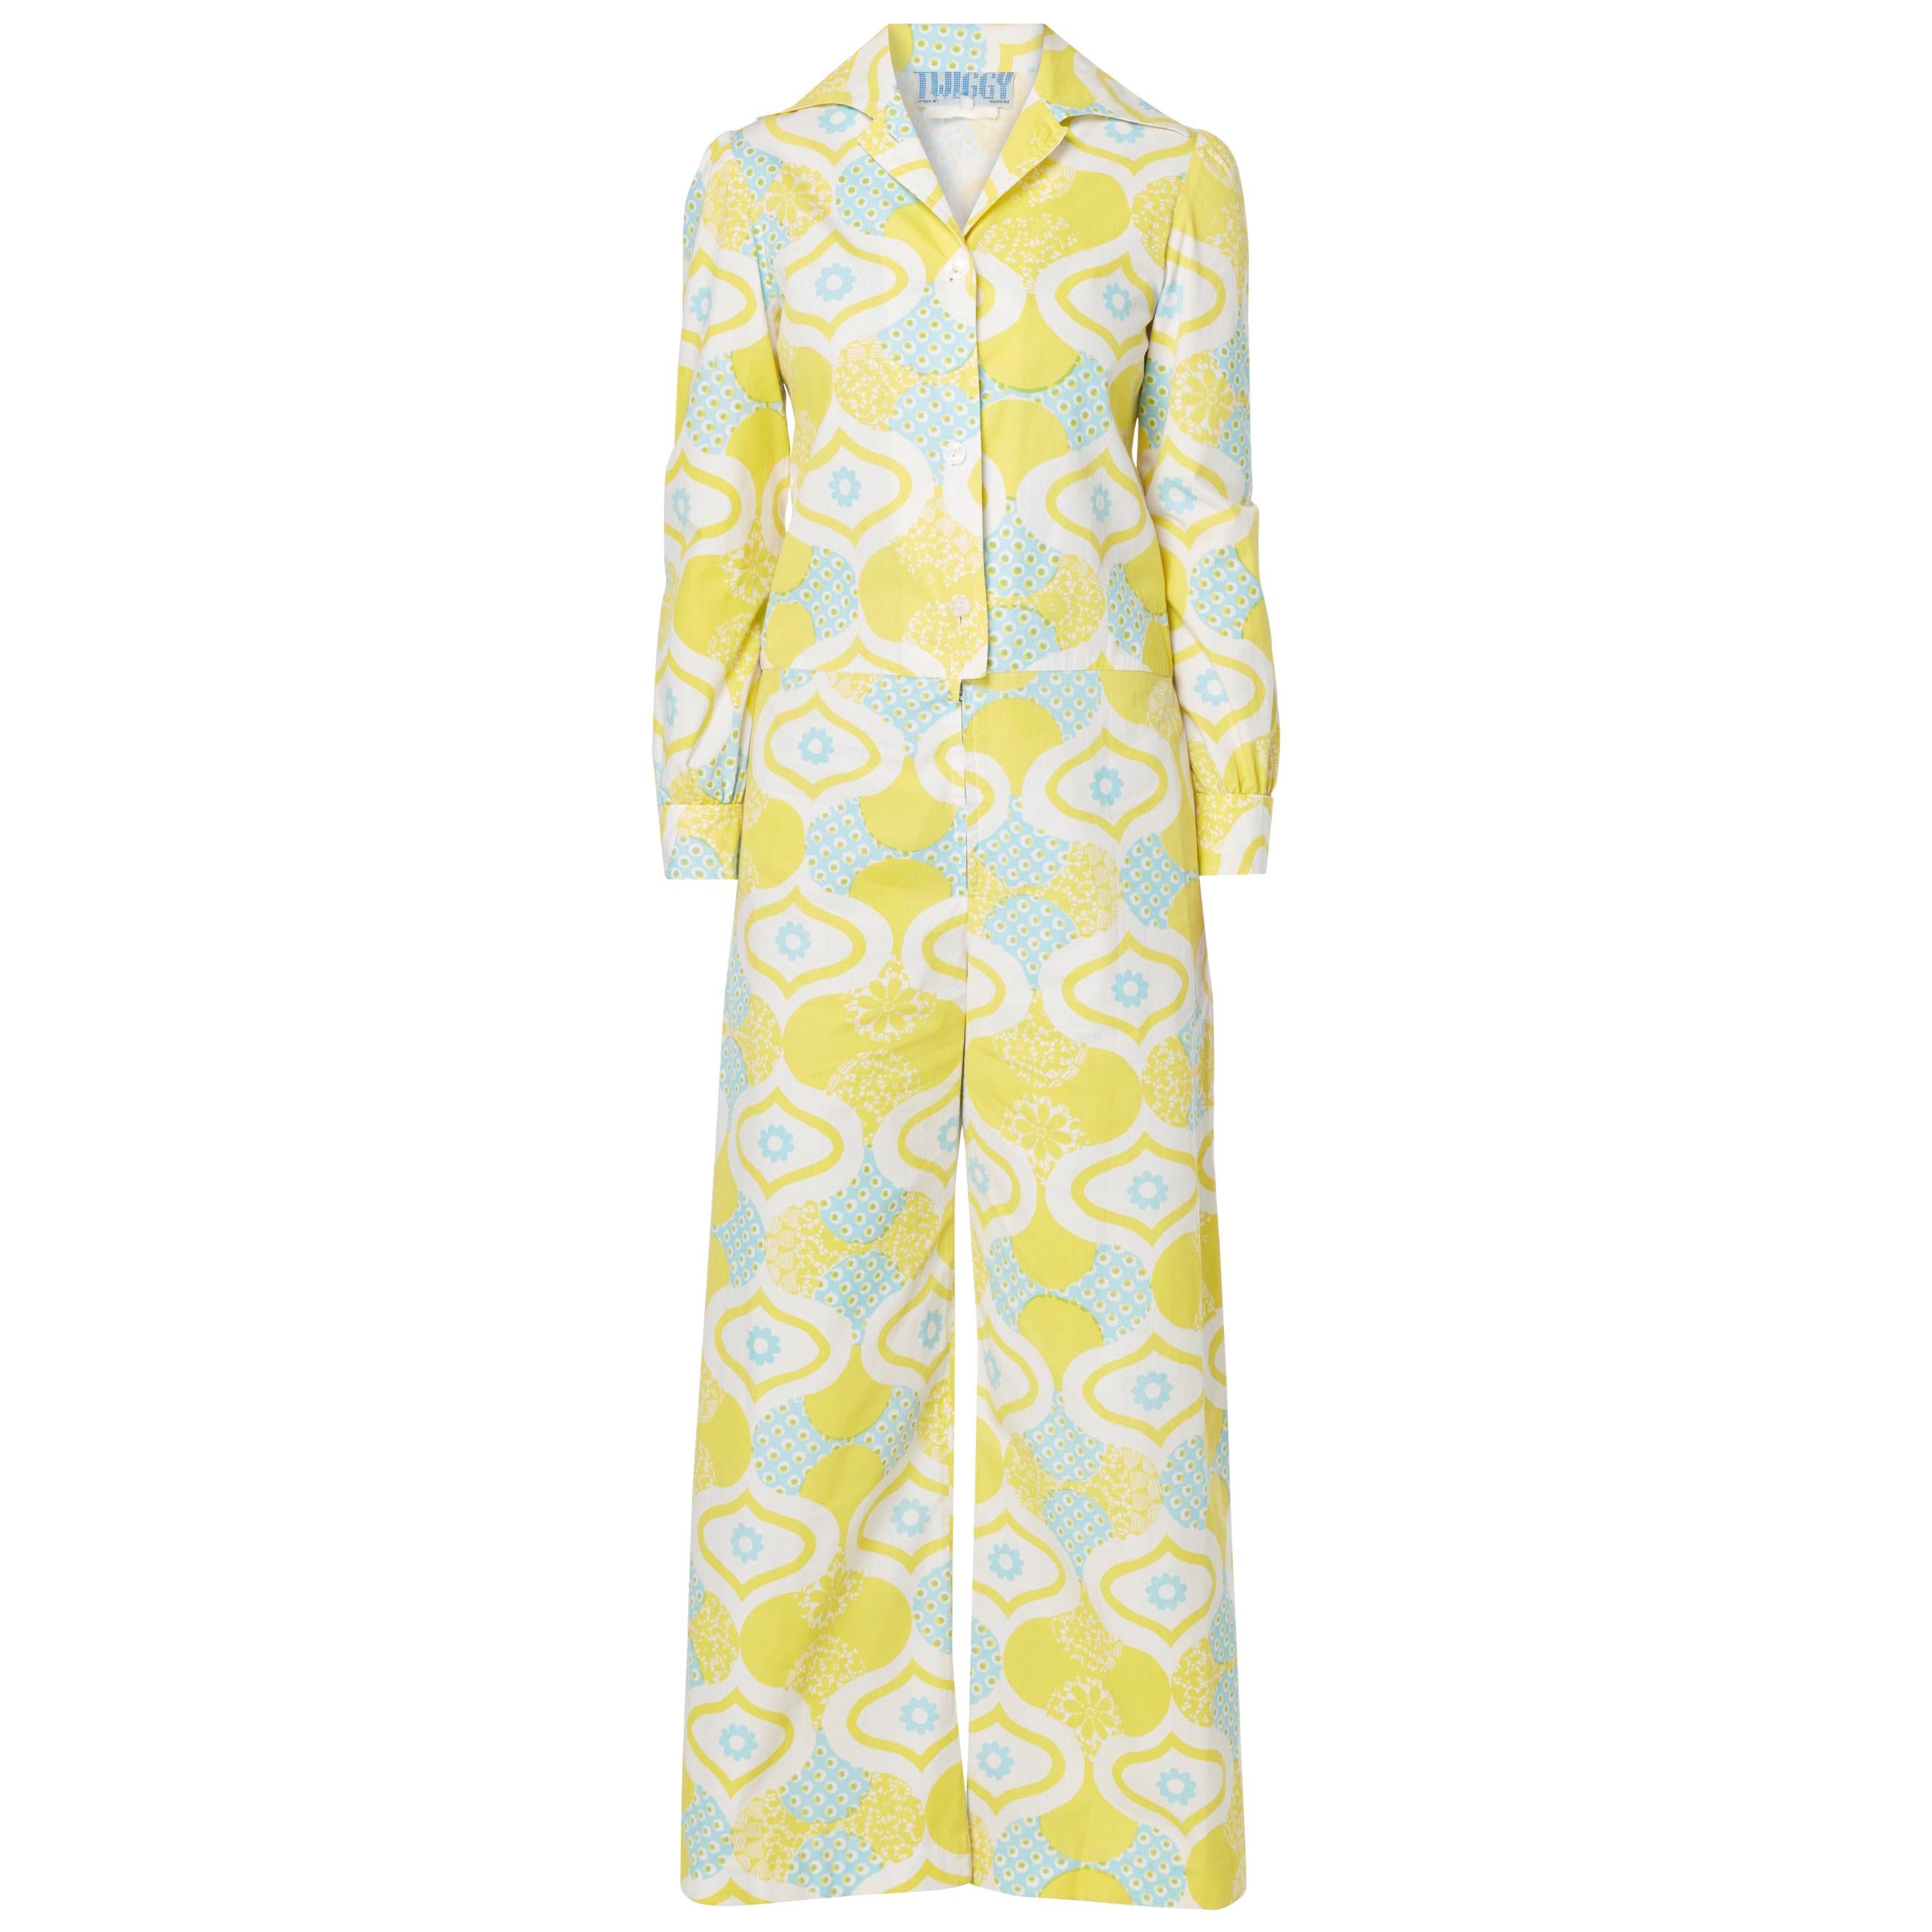 Twiggy yellow & blue print jumpsuit, circa 1967 For Sale